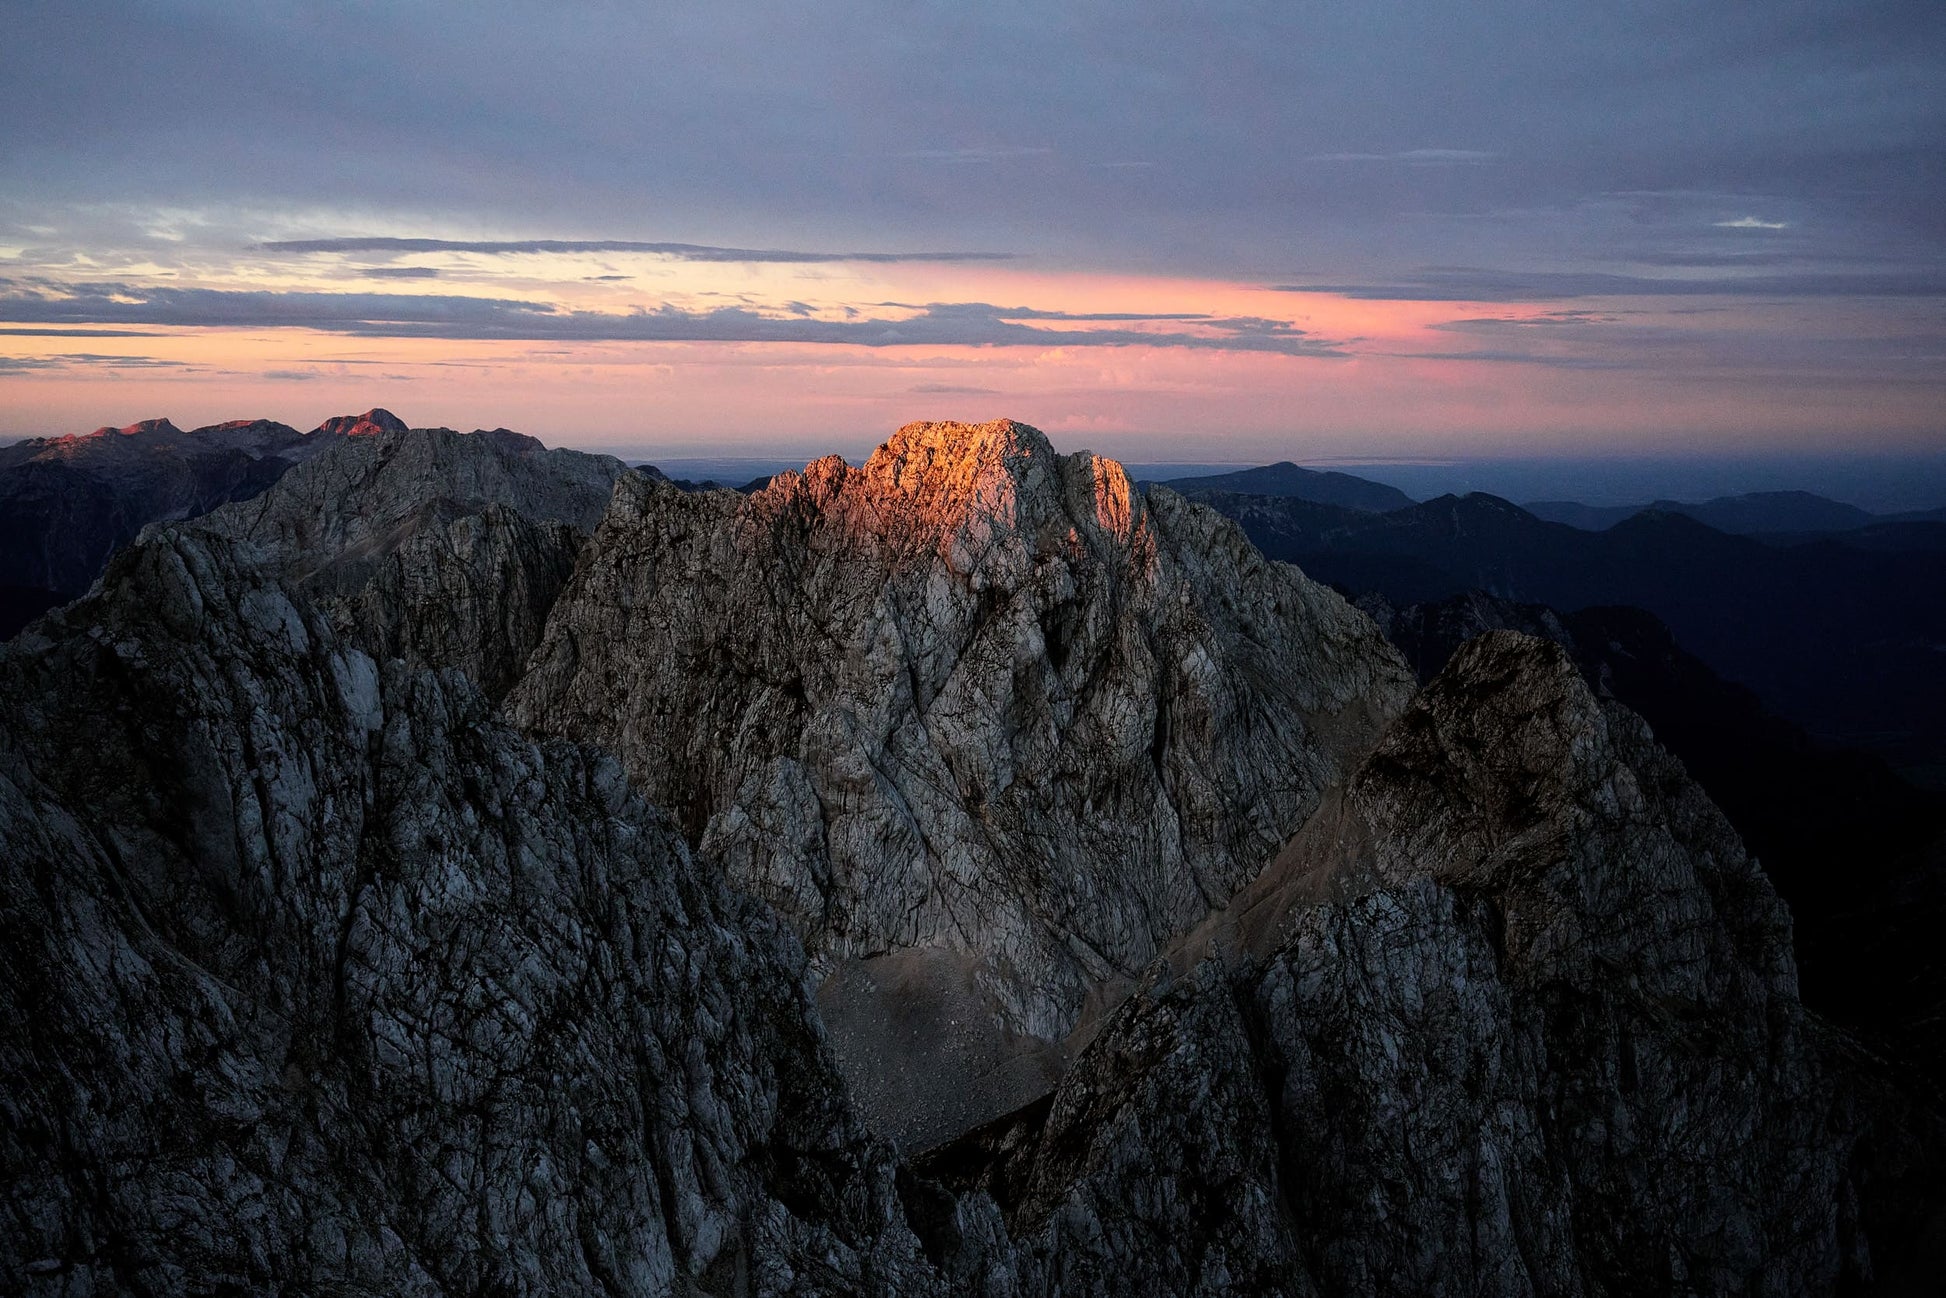 The artpiece 'Change' by Chris König shows a mountainvista of the Julian Alps with a red sky in the background.